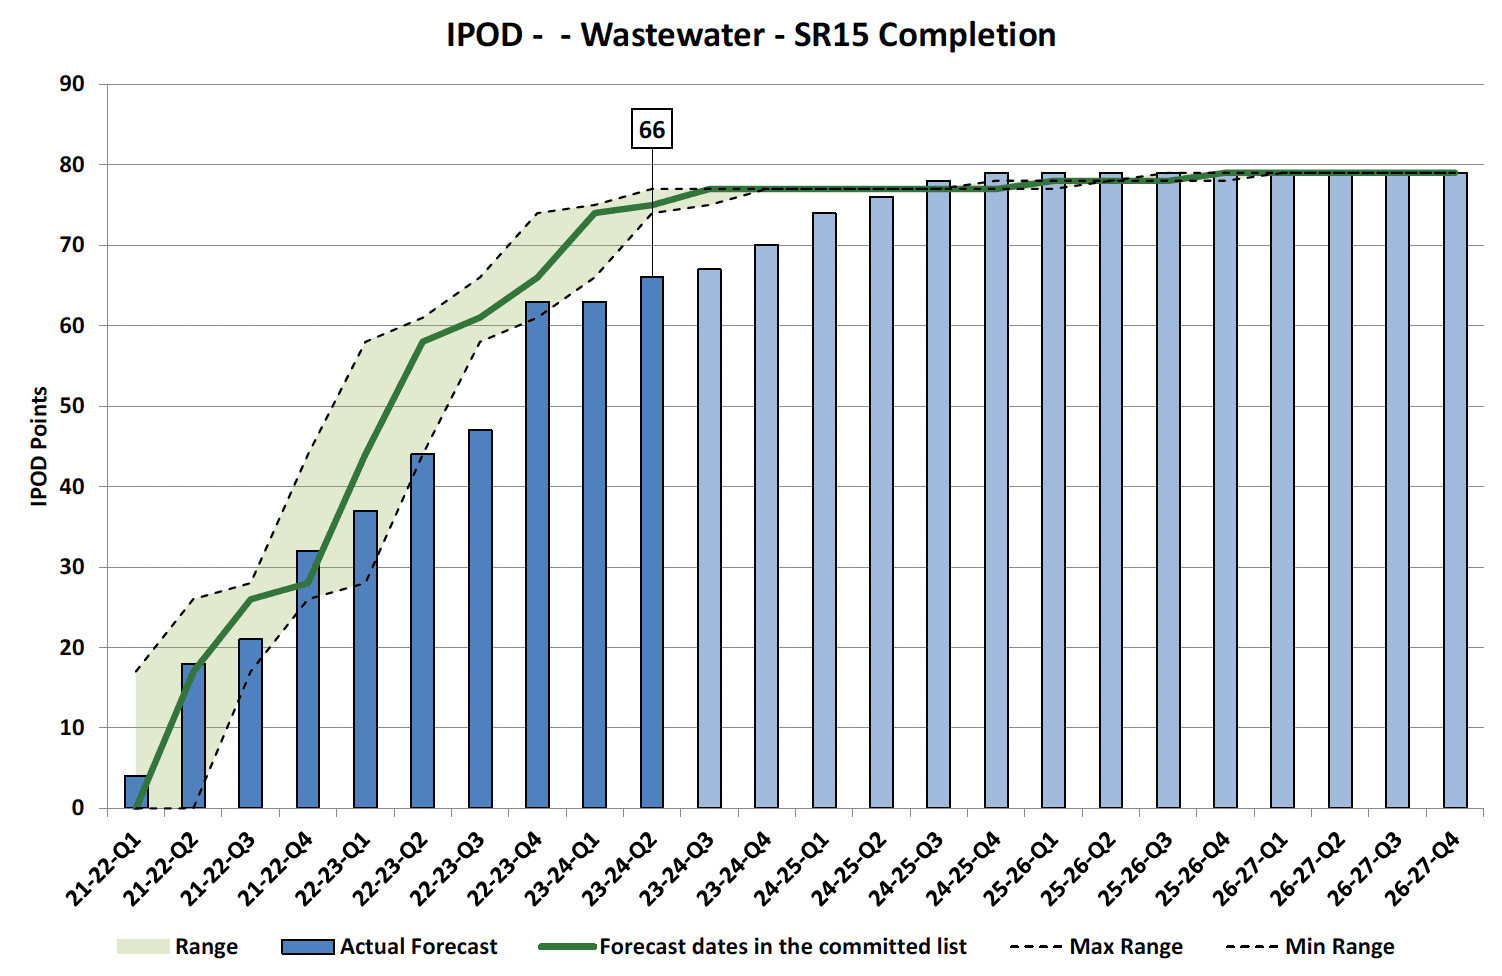 Chart showing IPOD points achieved or forecast for all milestones against target range for SR15 Completion Projects in Wastewater Portfolio